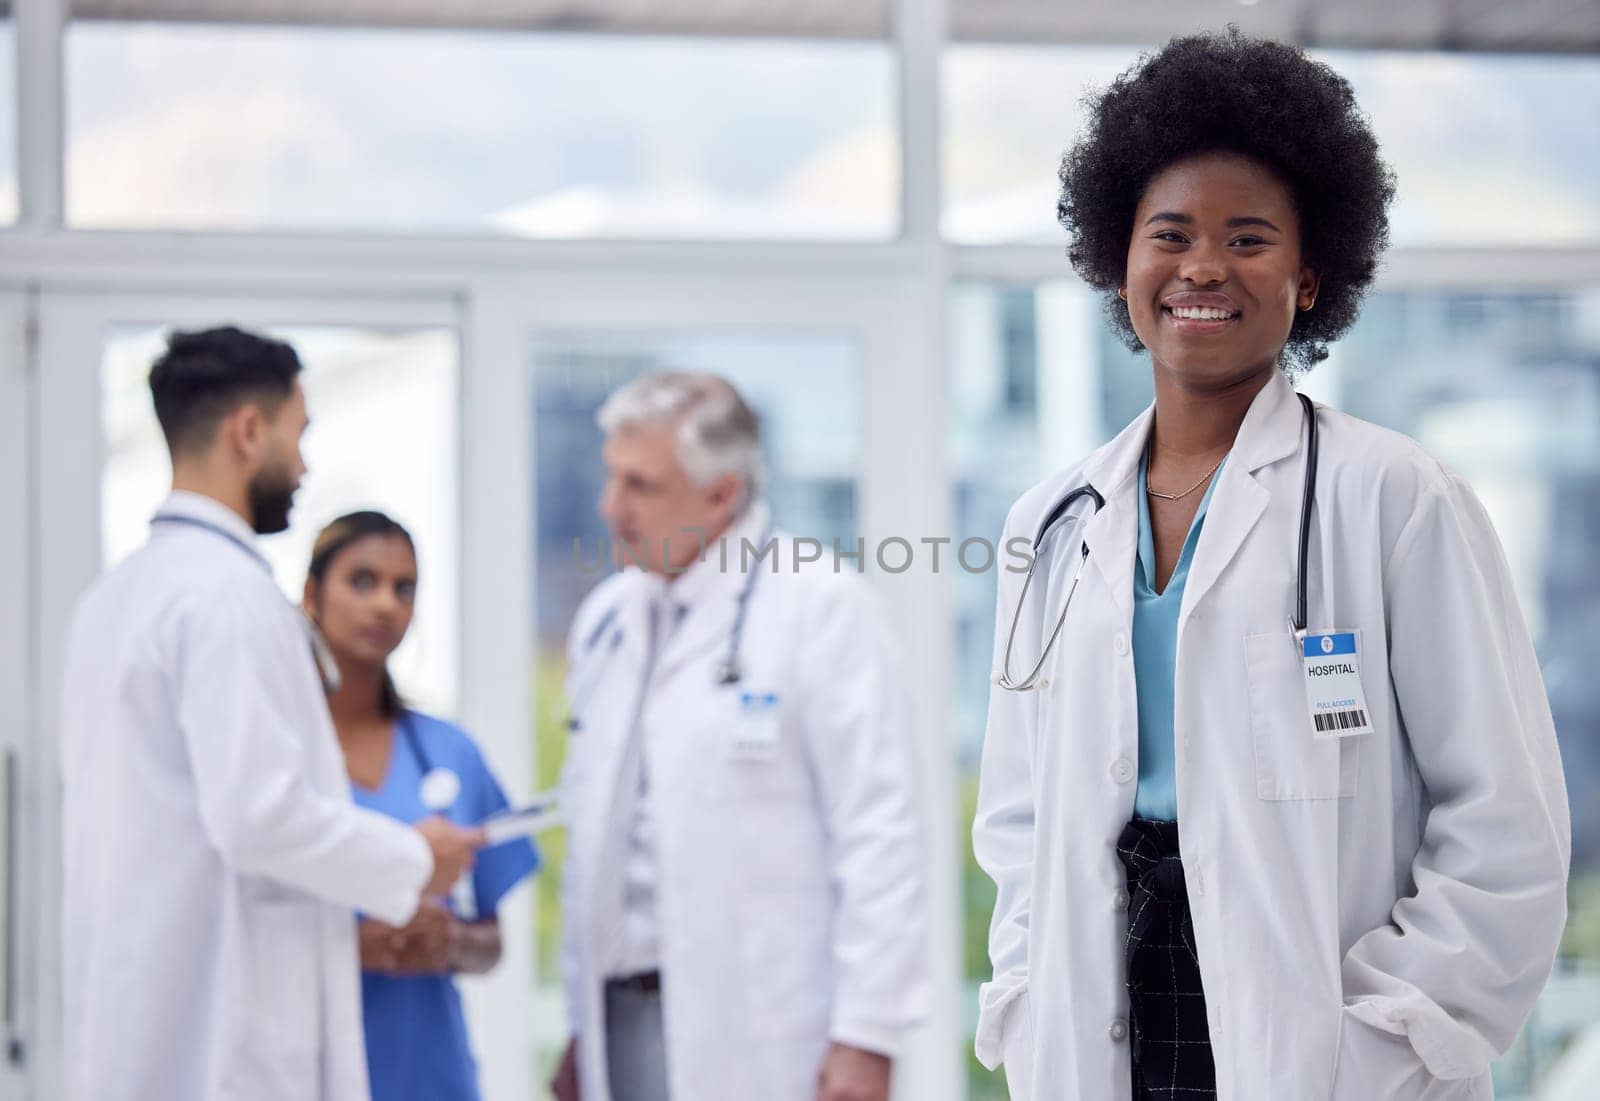 Black woman, portrait or doctor in clinic leadership, about us or medical collaboration for hospital medicine, trust or life insurance. Smile, happy or healthcare worker in diversity teamwork or help.